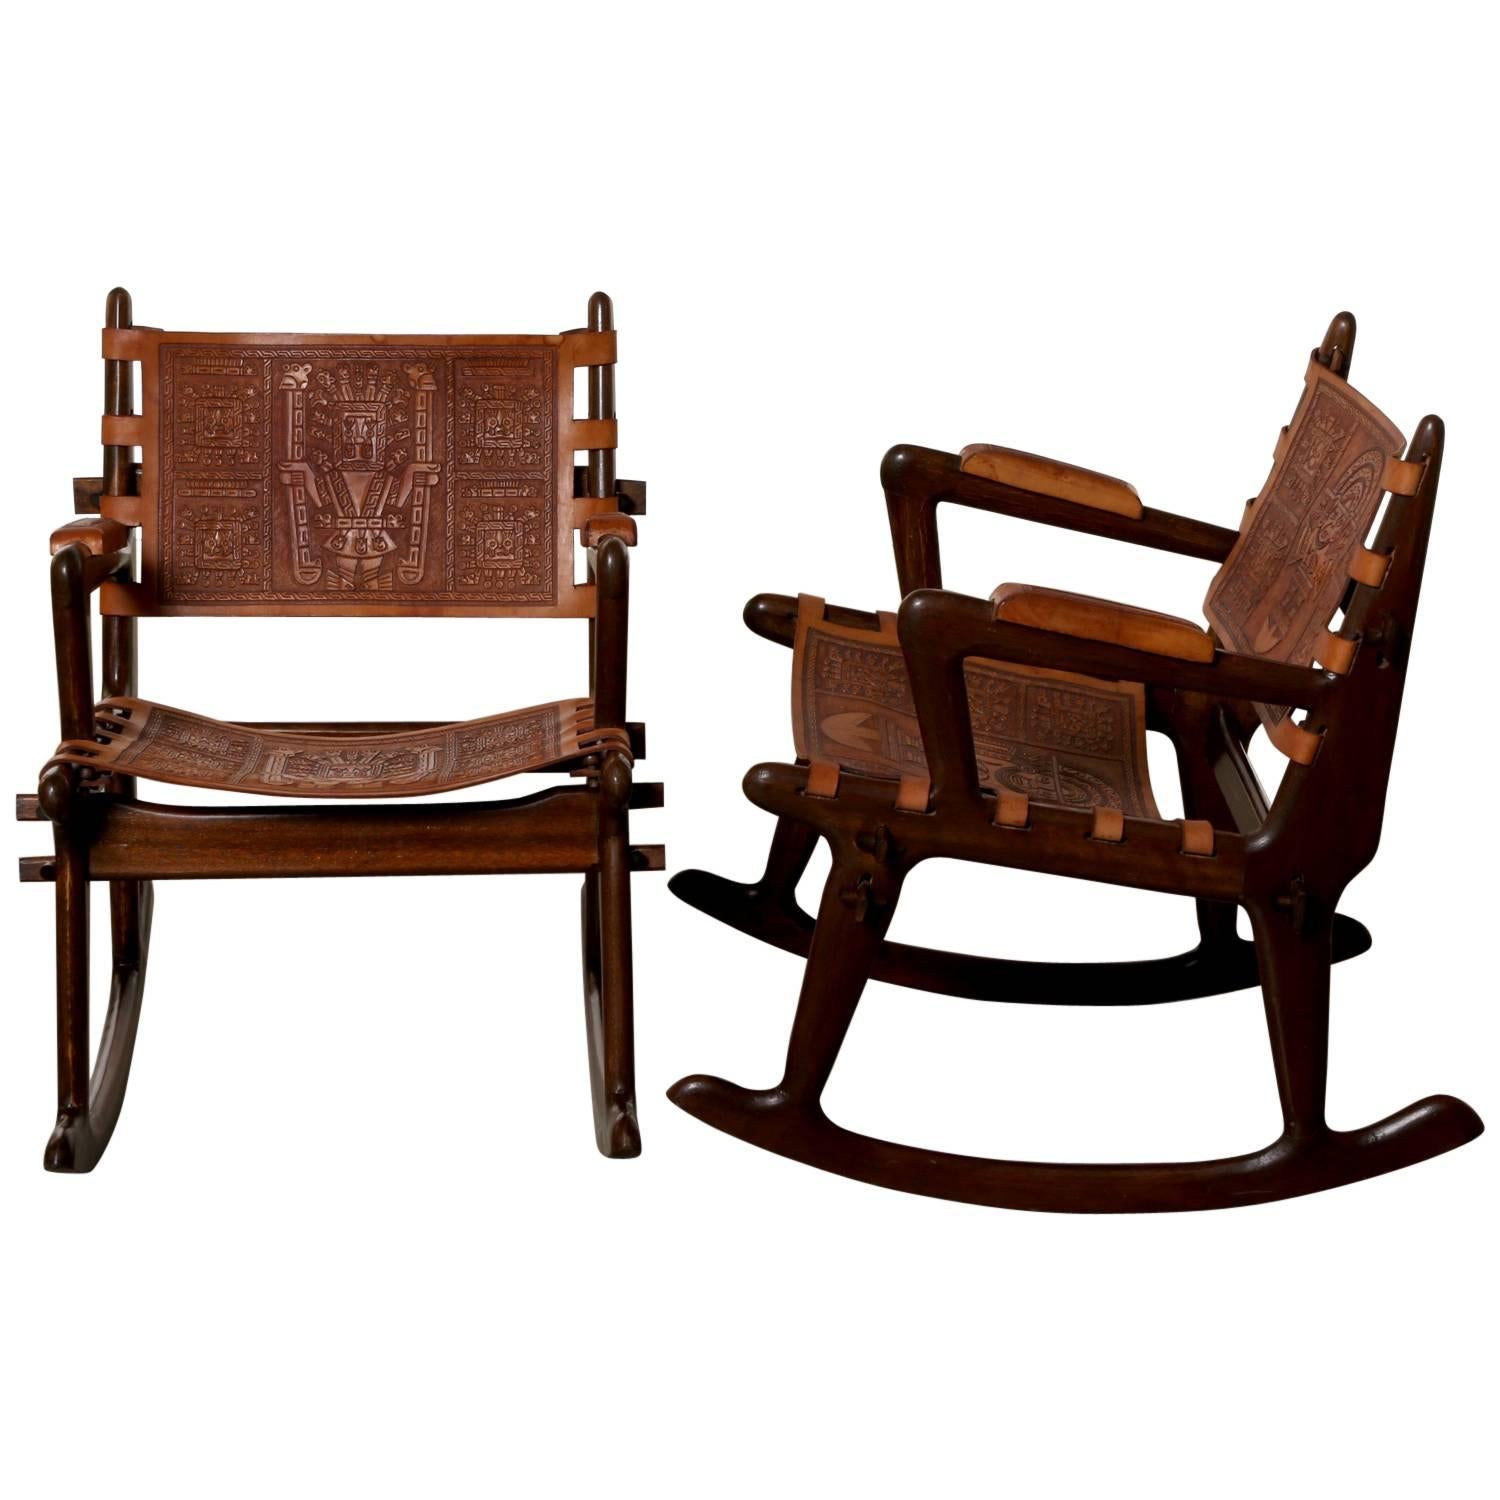 South American Wood and Tooled Leather Rocking Chairs, circa 1960s